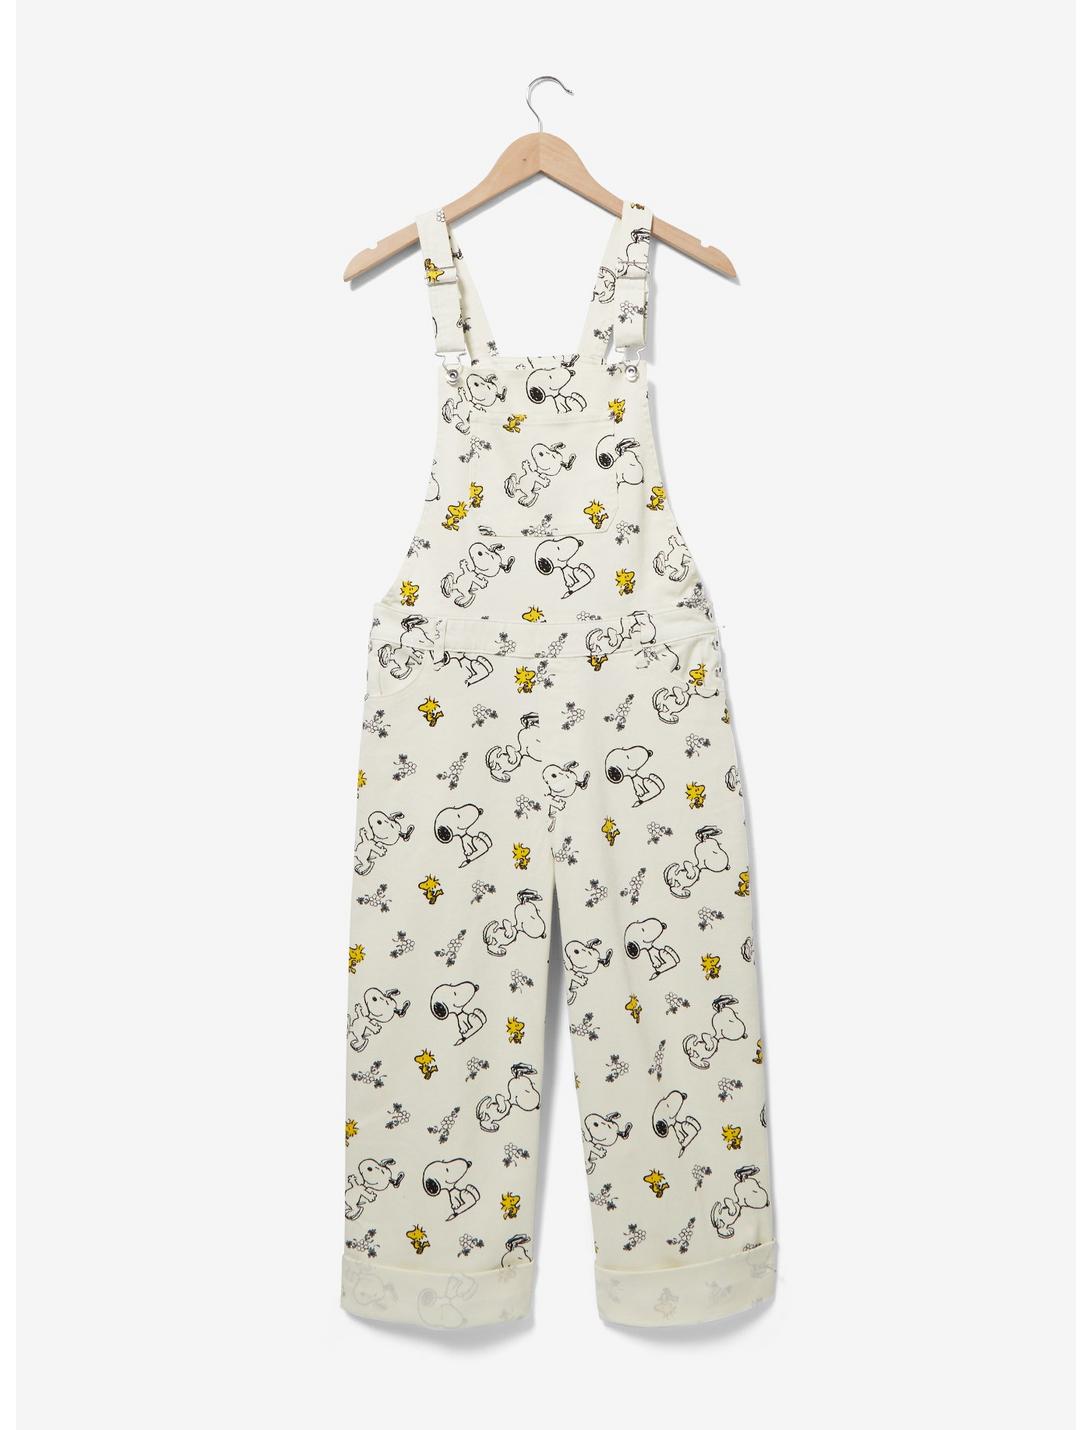 Peanuts Snoopy and Woodstock Allover Print Women's Overalls — BoxLunch Exclusive, OFF WHITE, hi-res